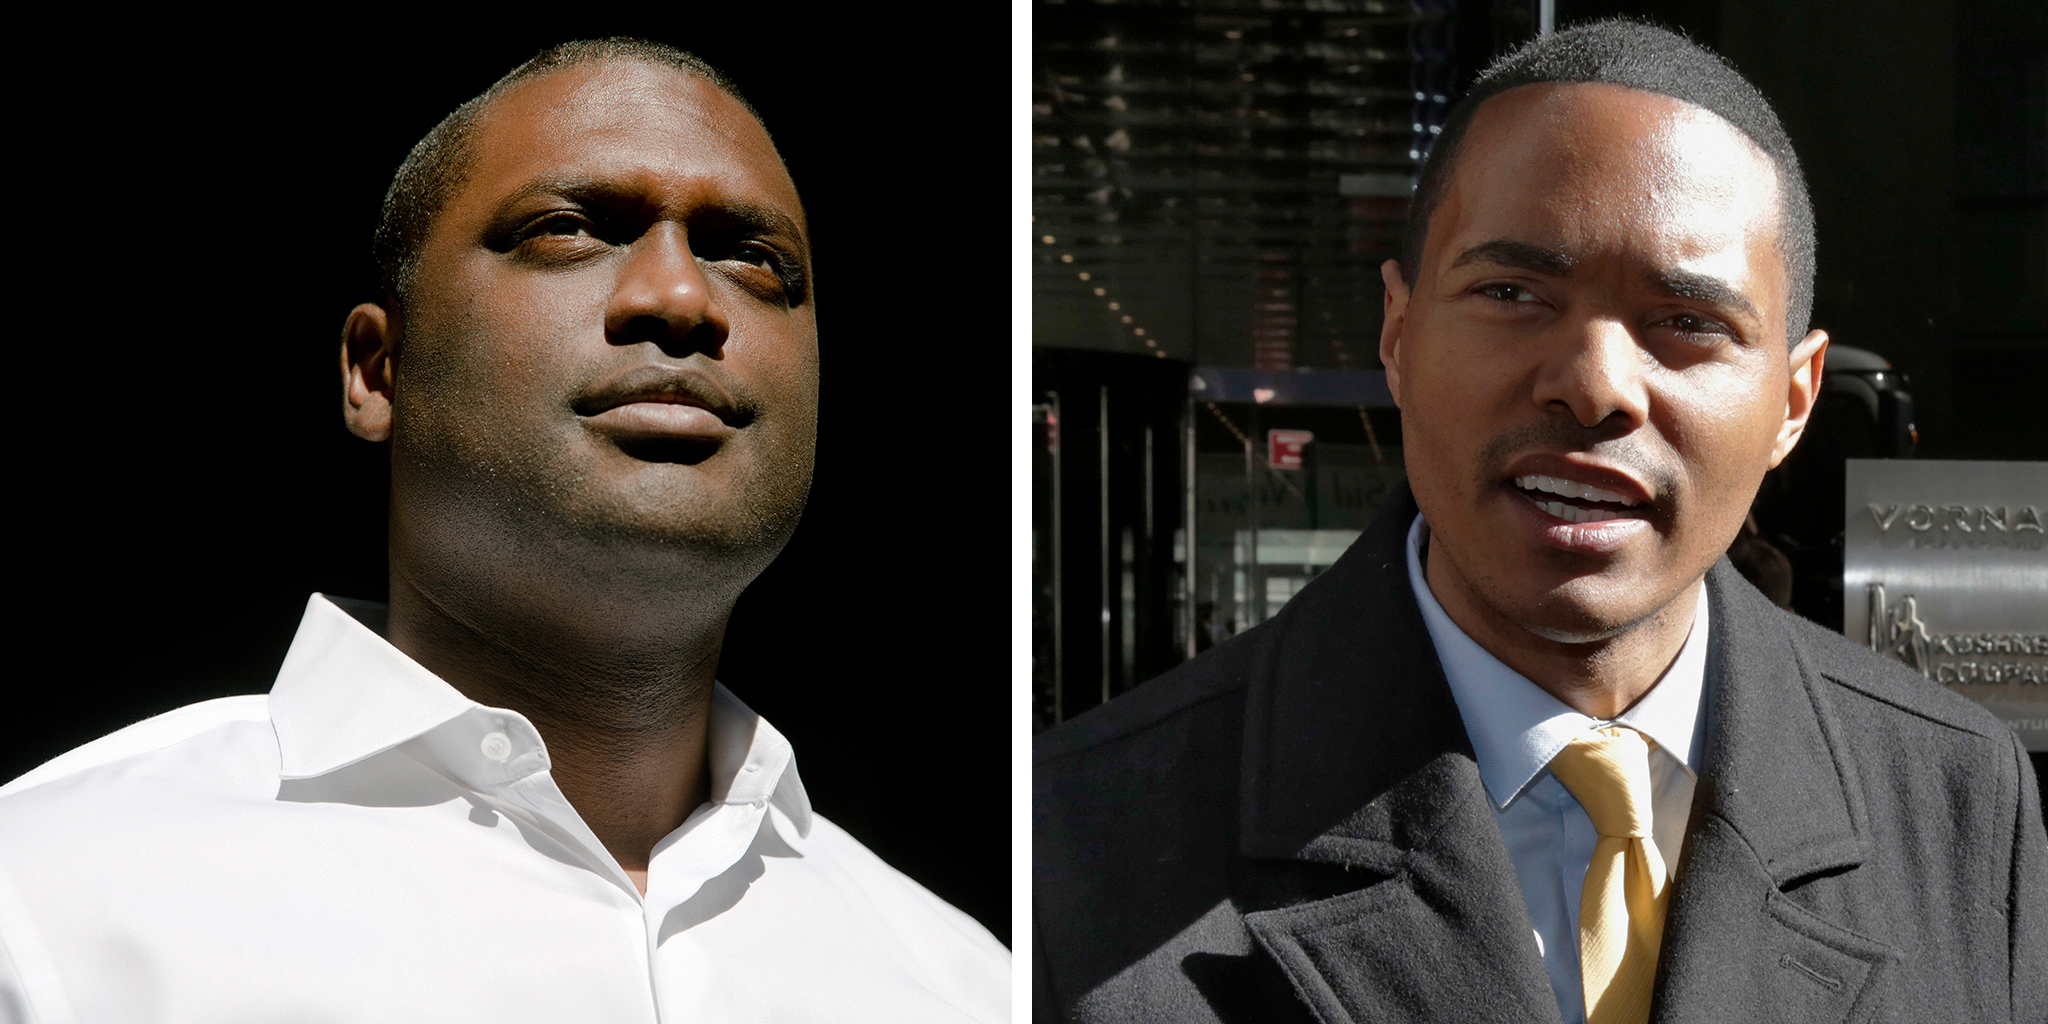 ‘this Has Been A Long Time Coming Two New York Candidates Now Poised To Become First Openly